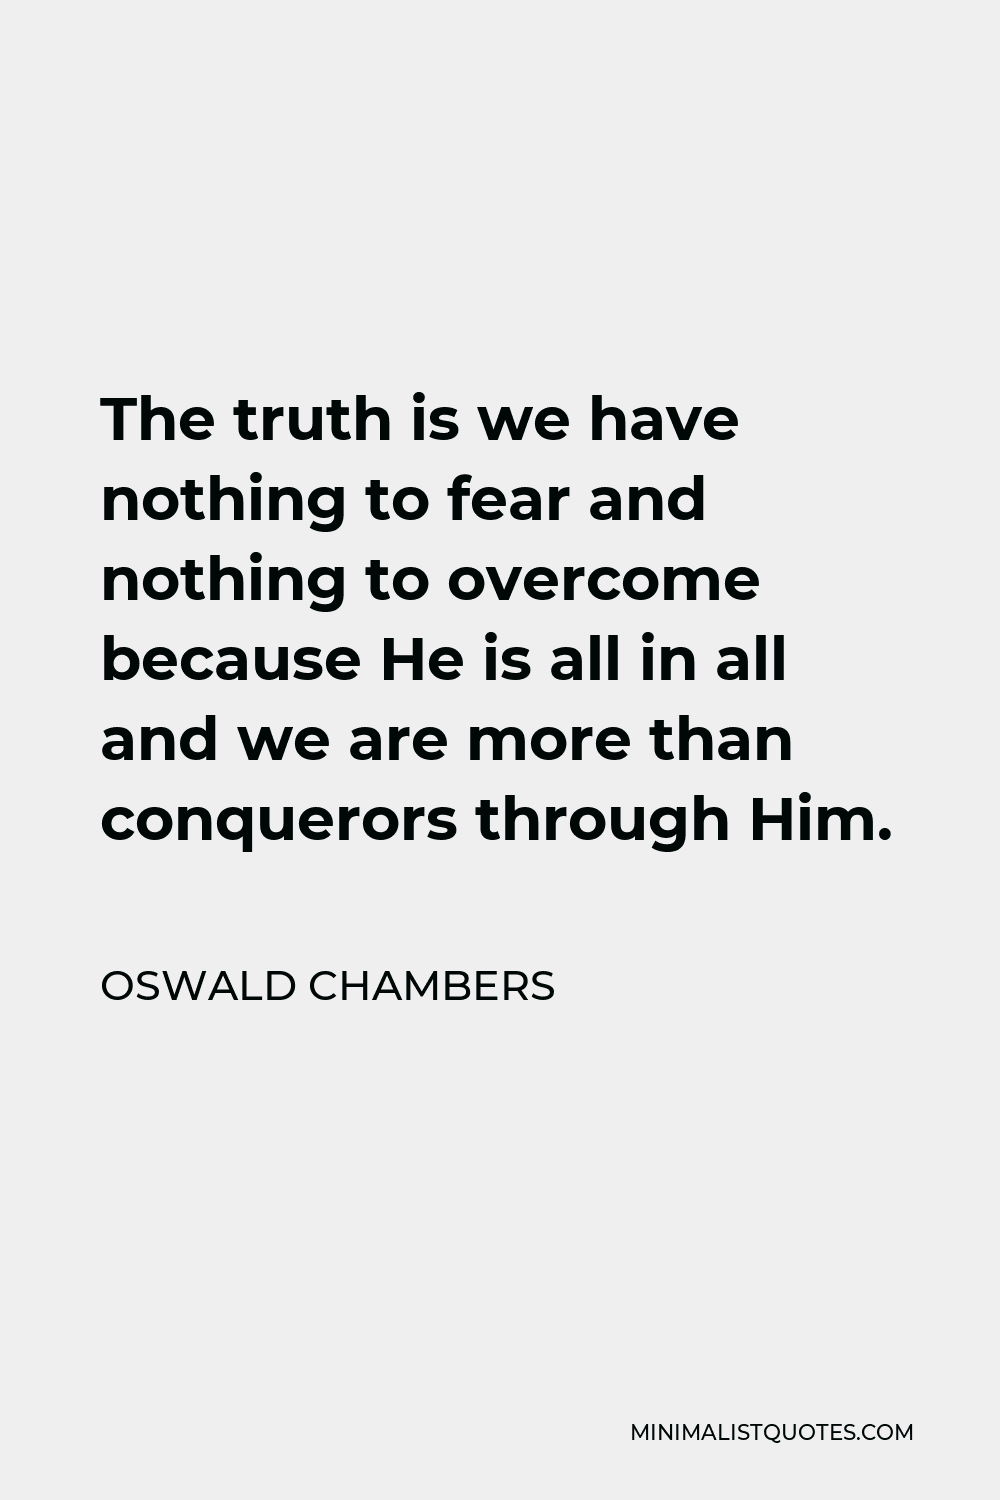 Oswald Chambers Quote - The truth is we have nothing to fear and nothing to overcome because He is all in all and we are more than conquerors through Him.